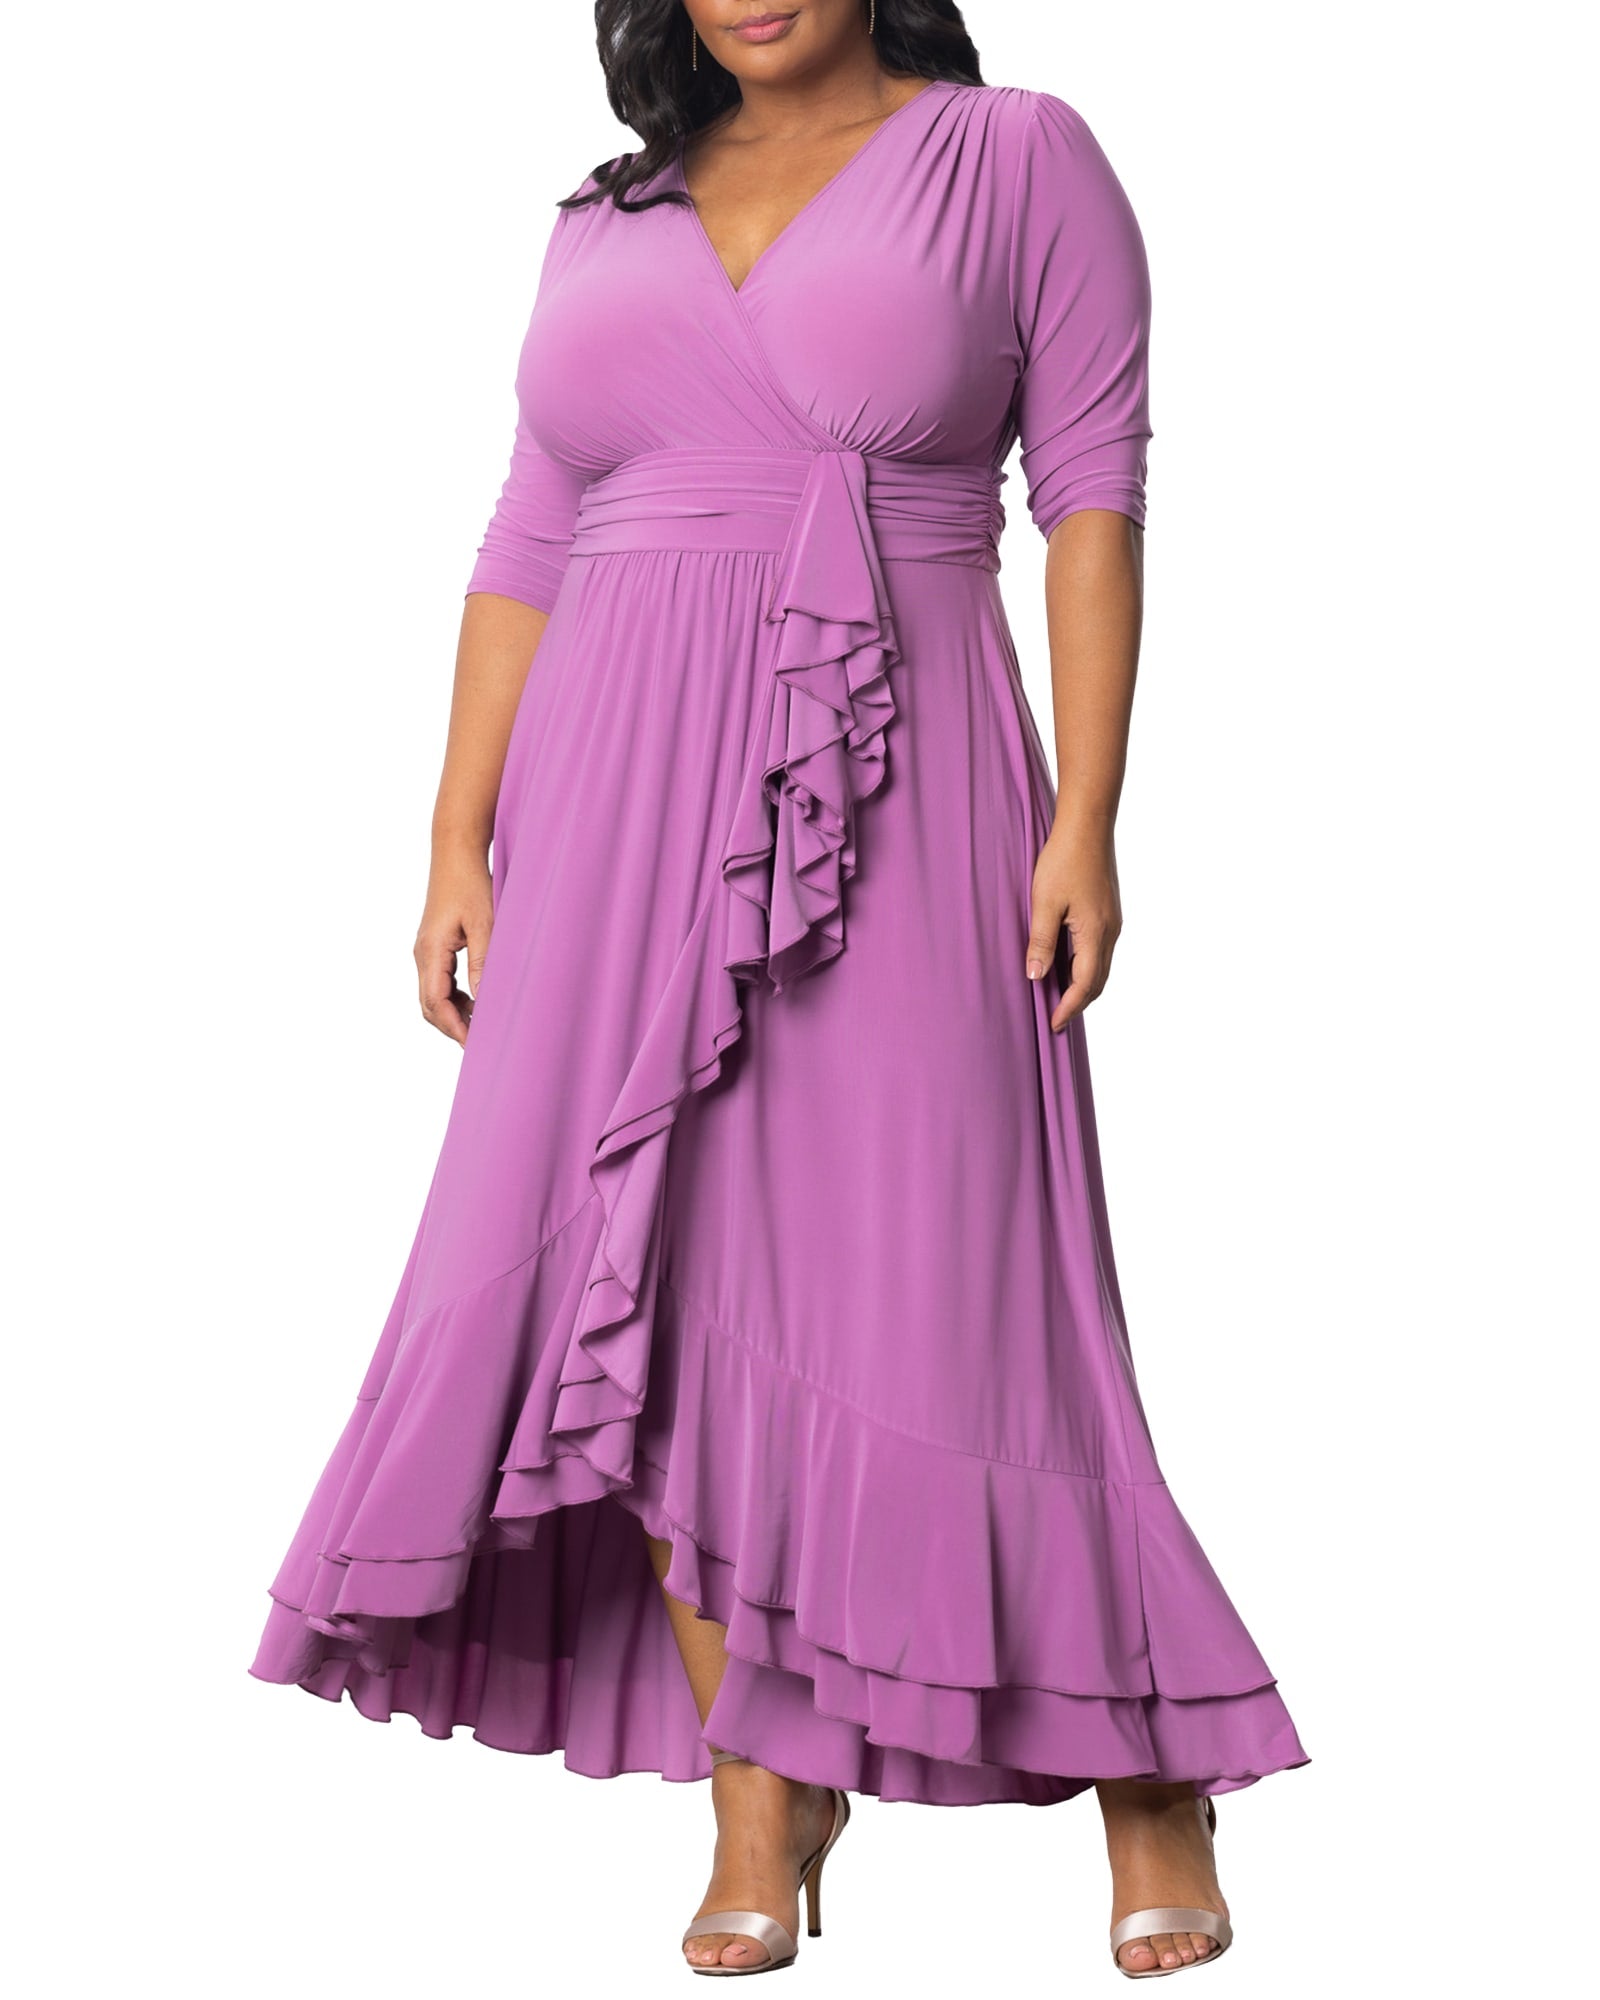 Veronica Ruffled Evening Gown | LILAC